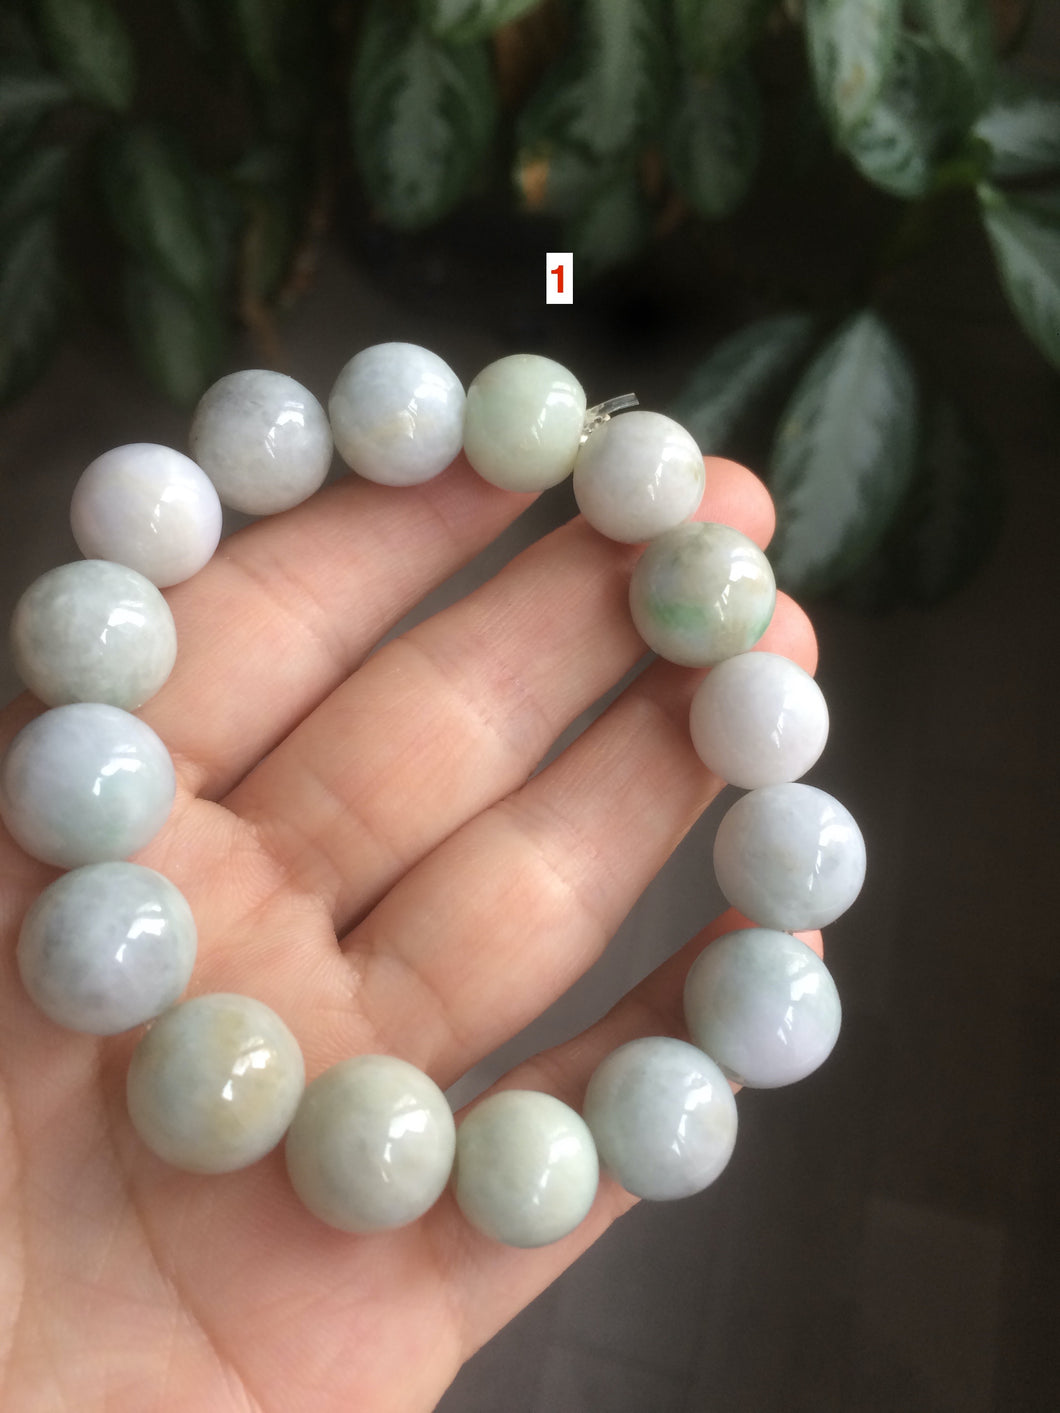 12-13mm 100% natural type A yellow/white/green jadeite jade beads bracelet U102 (add on item.  Not sale individually)